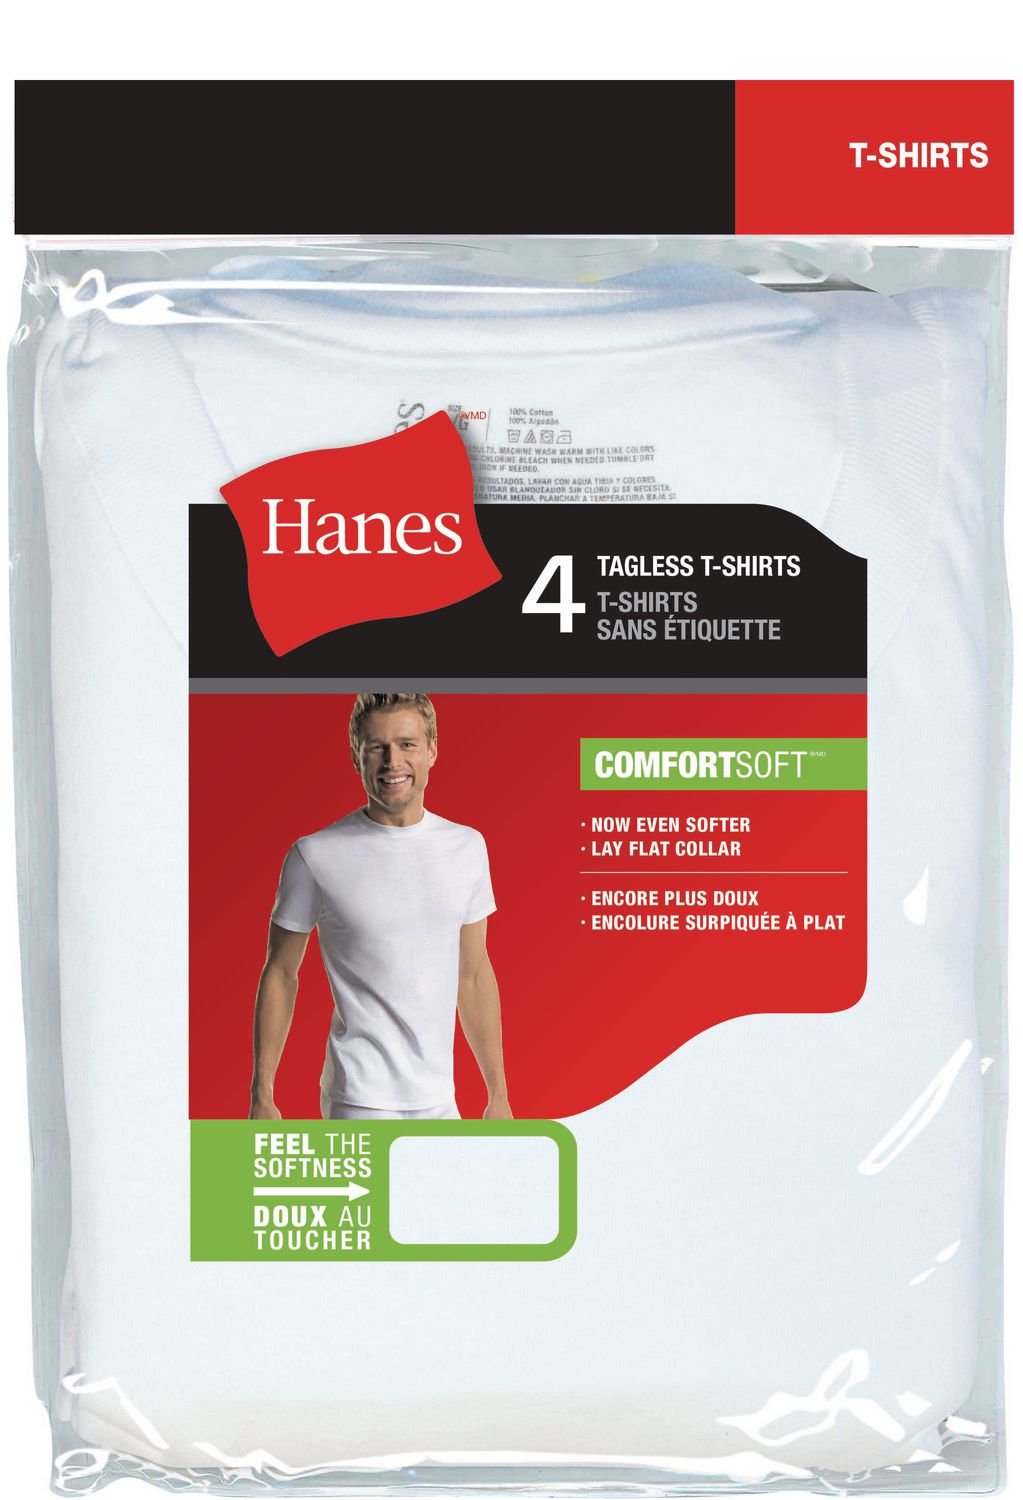 Hanes Men's Tagless T-Shirts, Pack of 4, Sizes S-3XL